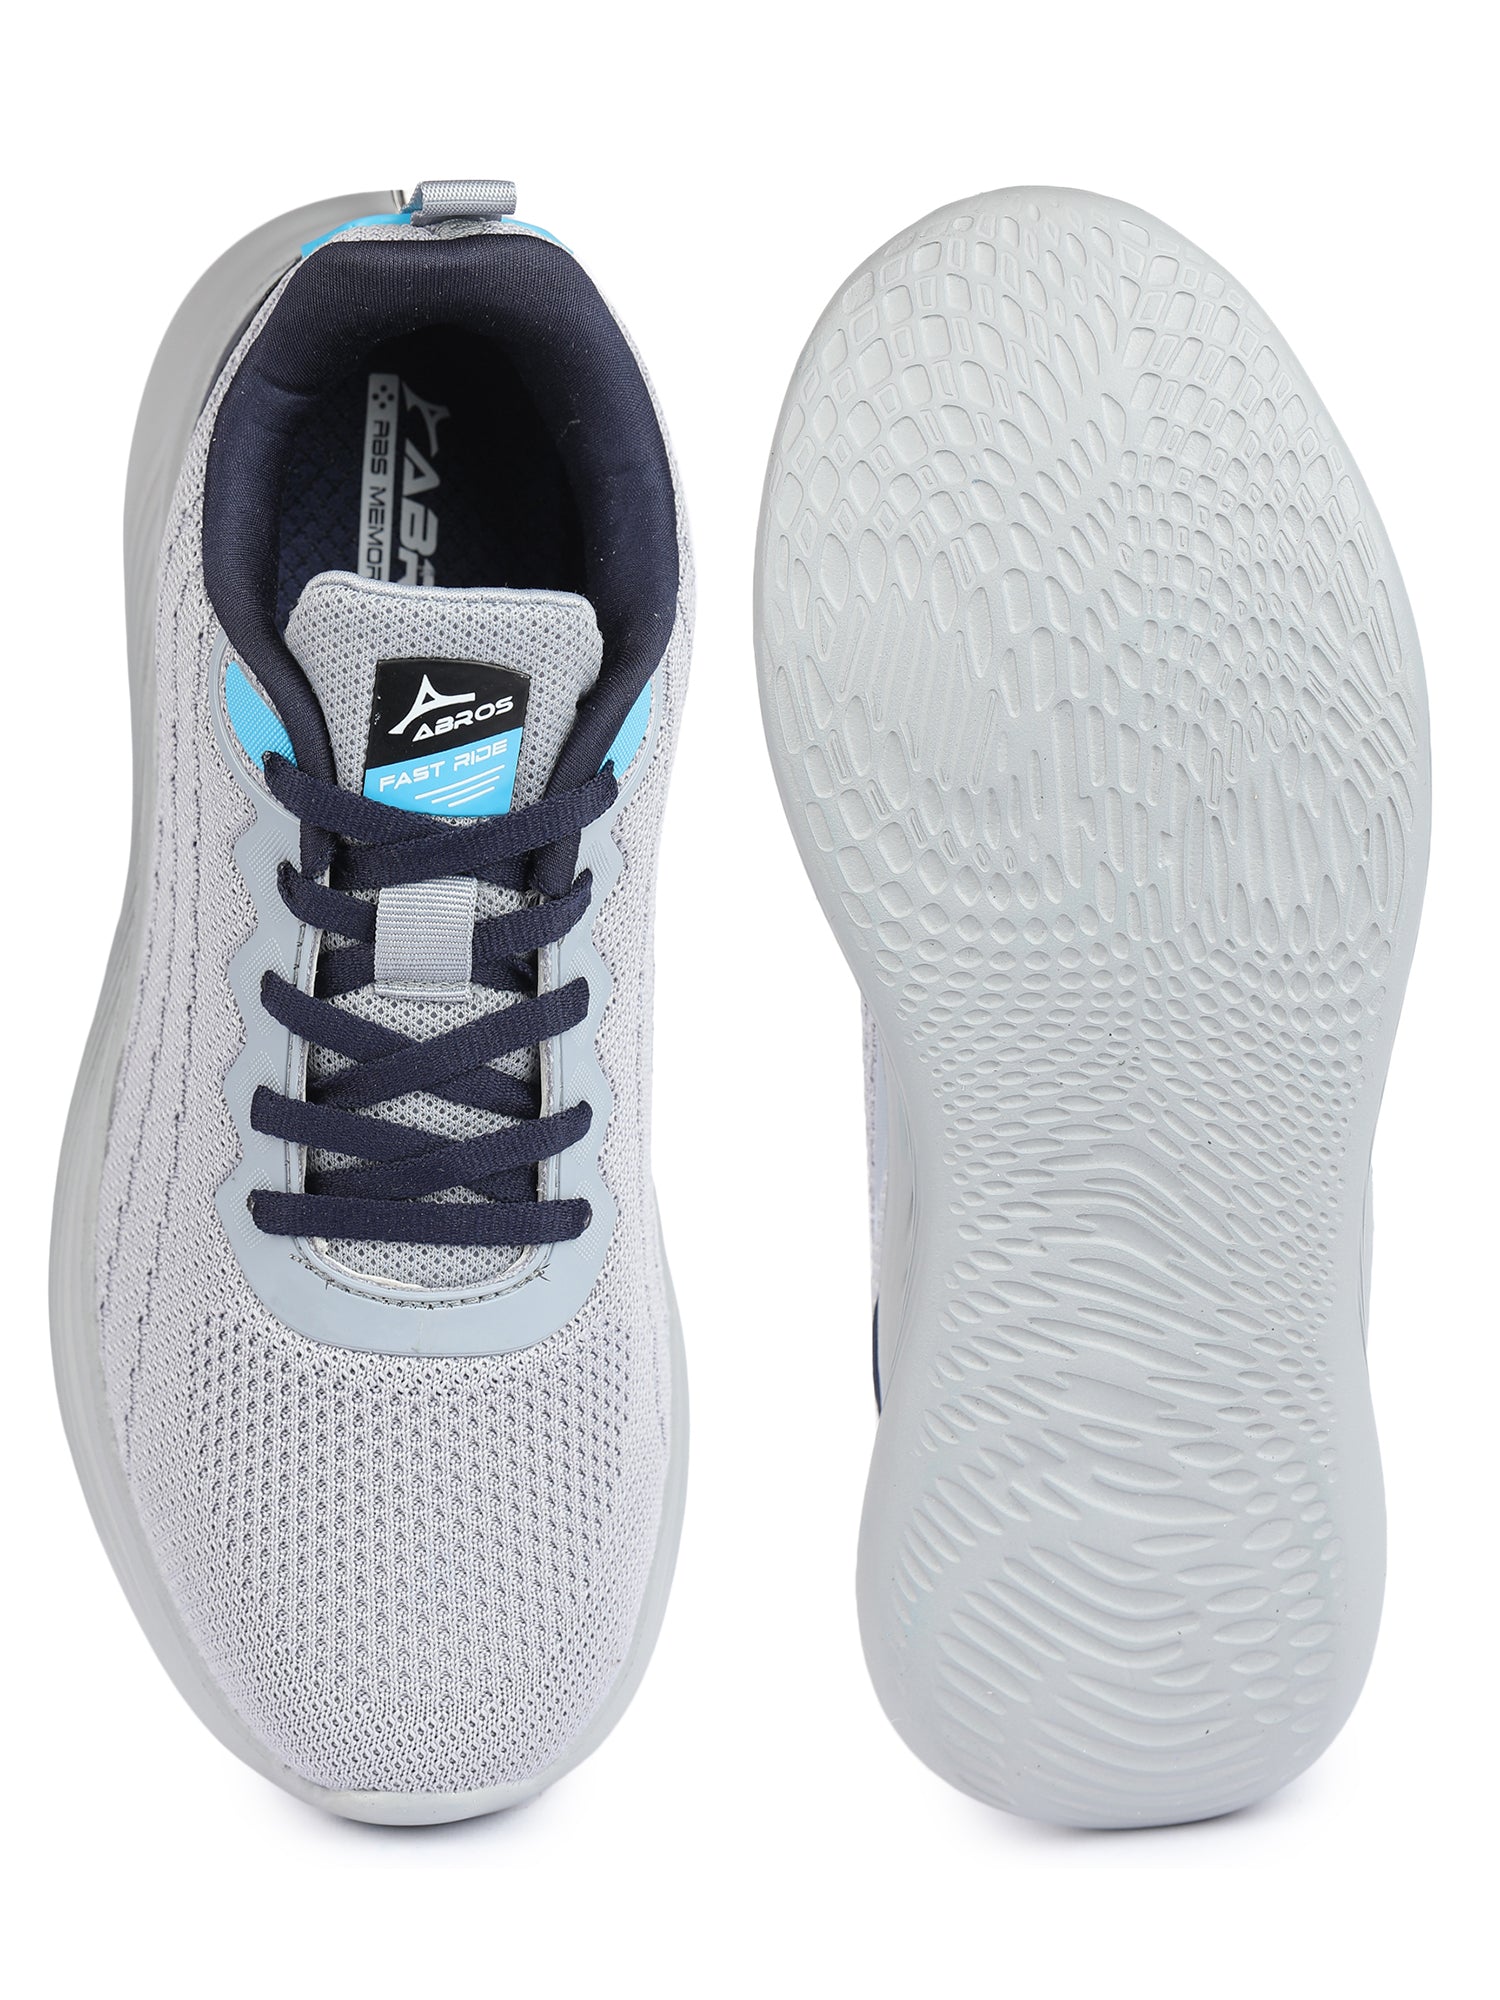 ABROS  ORBIT RUNNING SPORTS SHOES FOR MEN